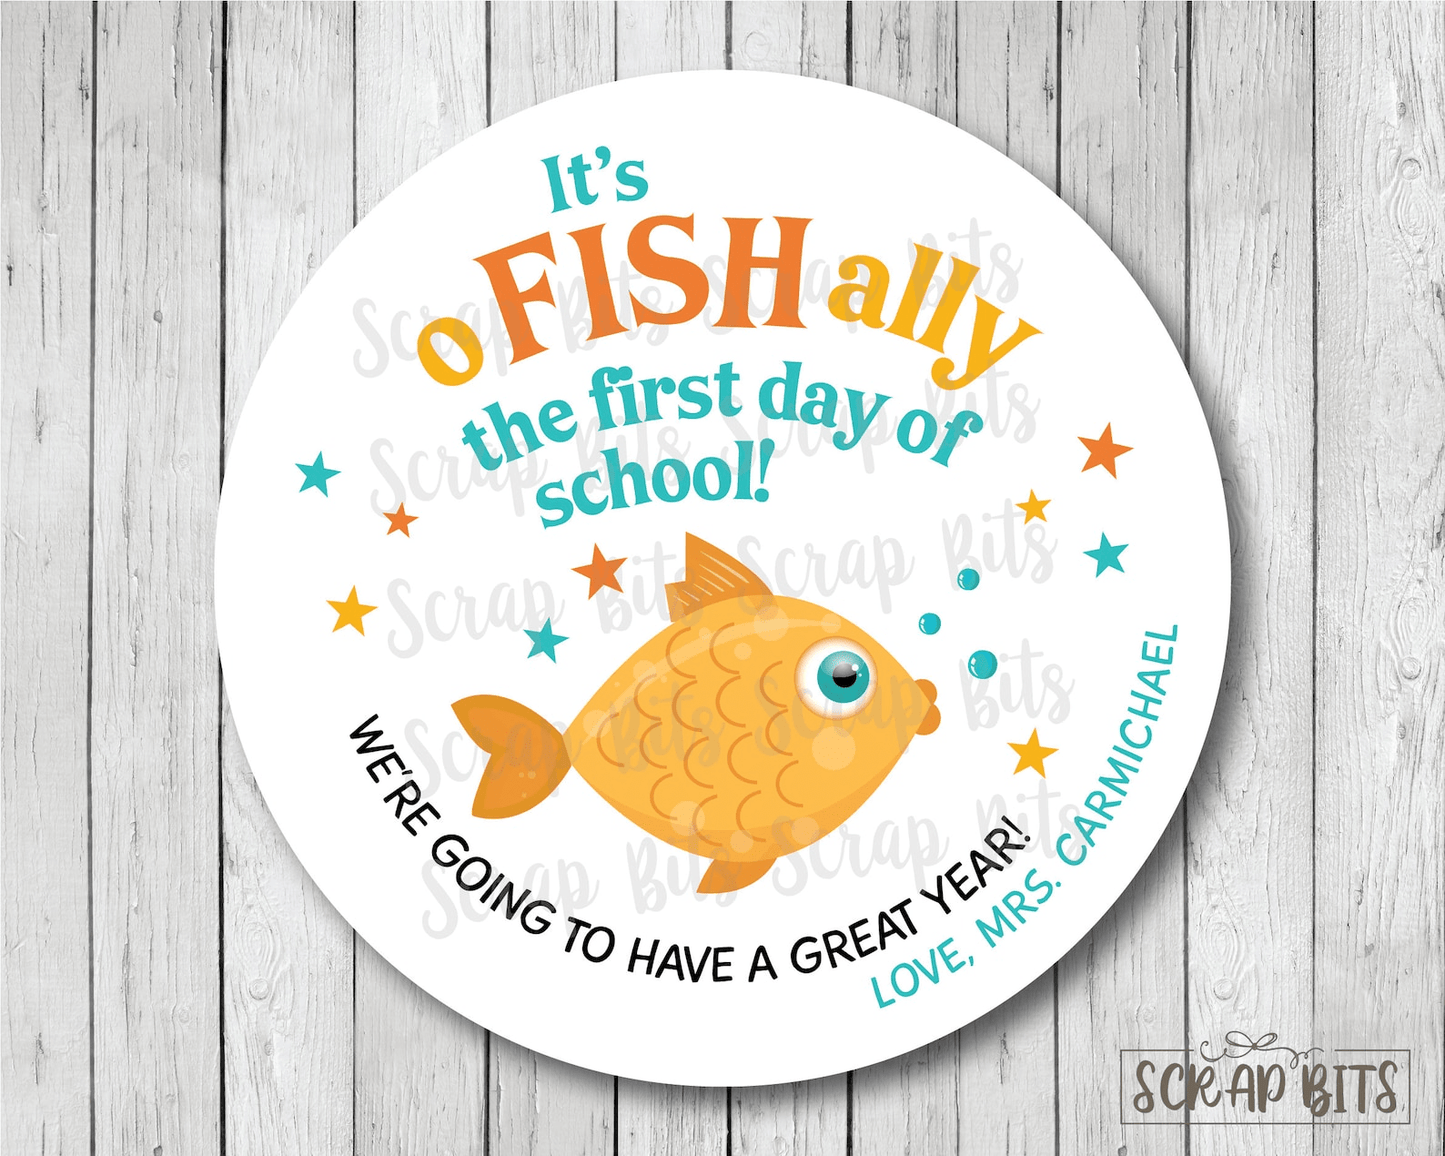 O-Fish-Ally First Day of School Stickers . Printable Back To School Labels, Instant Download Editable Template - Scrap Bits